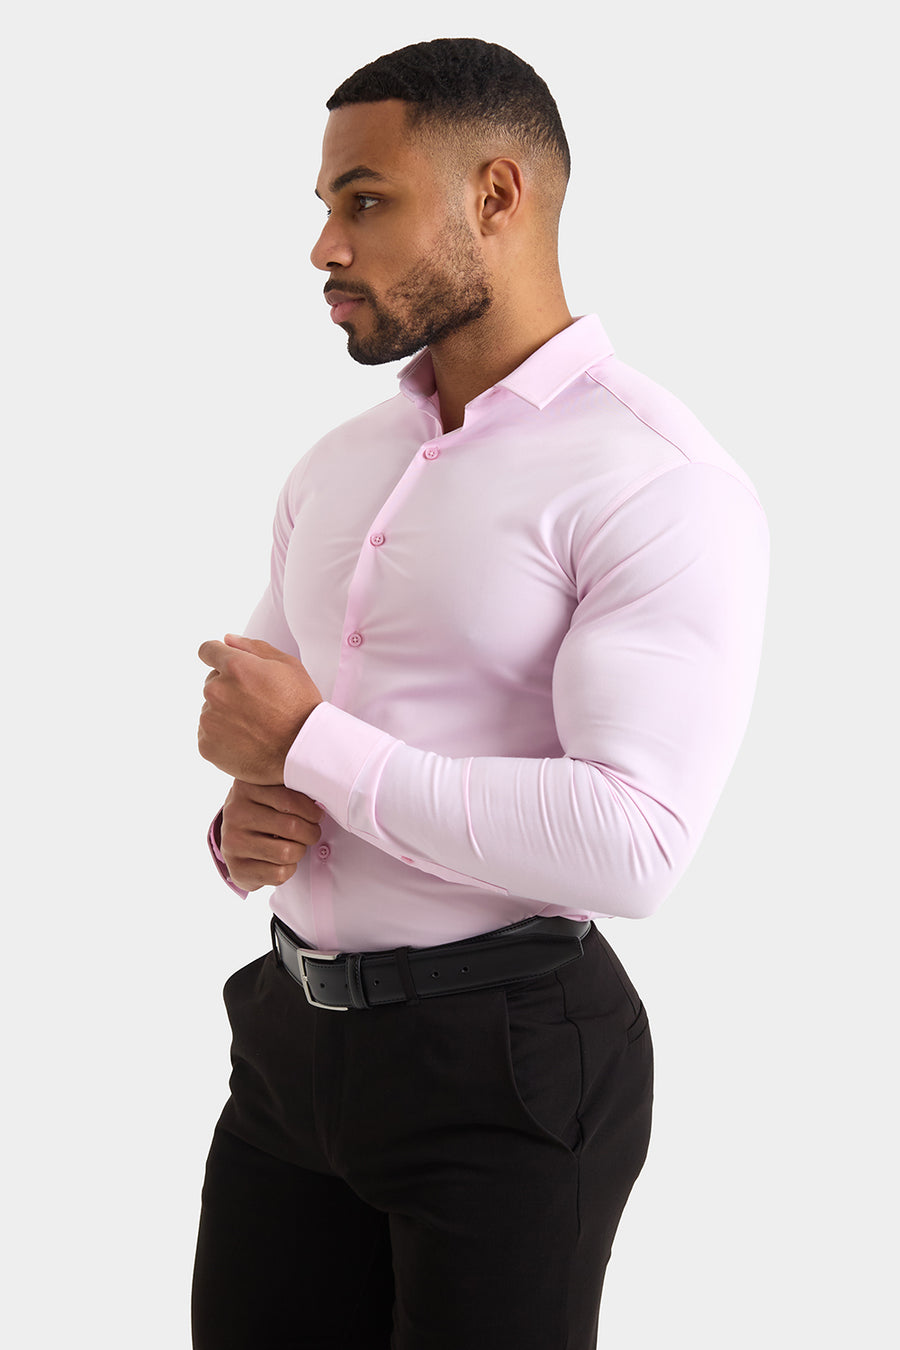 Athletic Fit Dress Shirt in Pink - TAILORED ATHLETE - USA